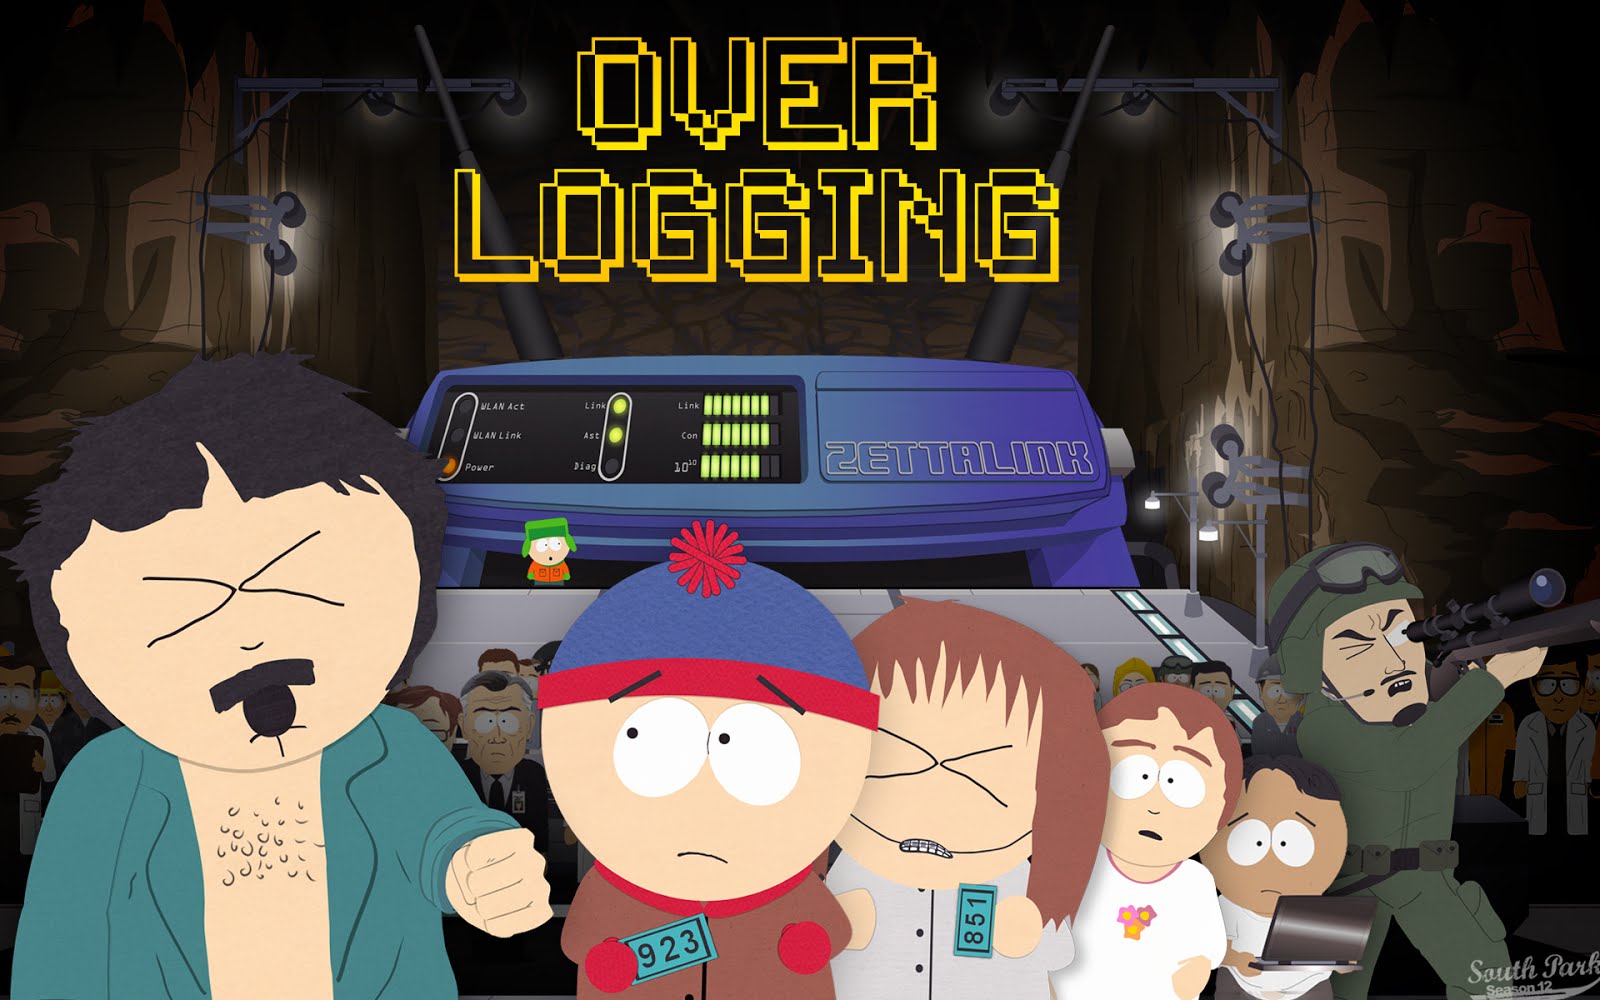 Southpark: South Park Wallpapers